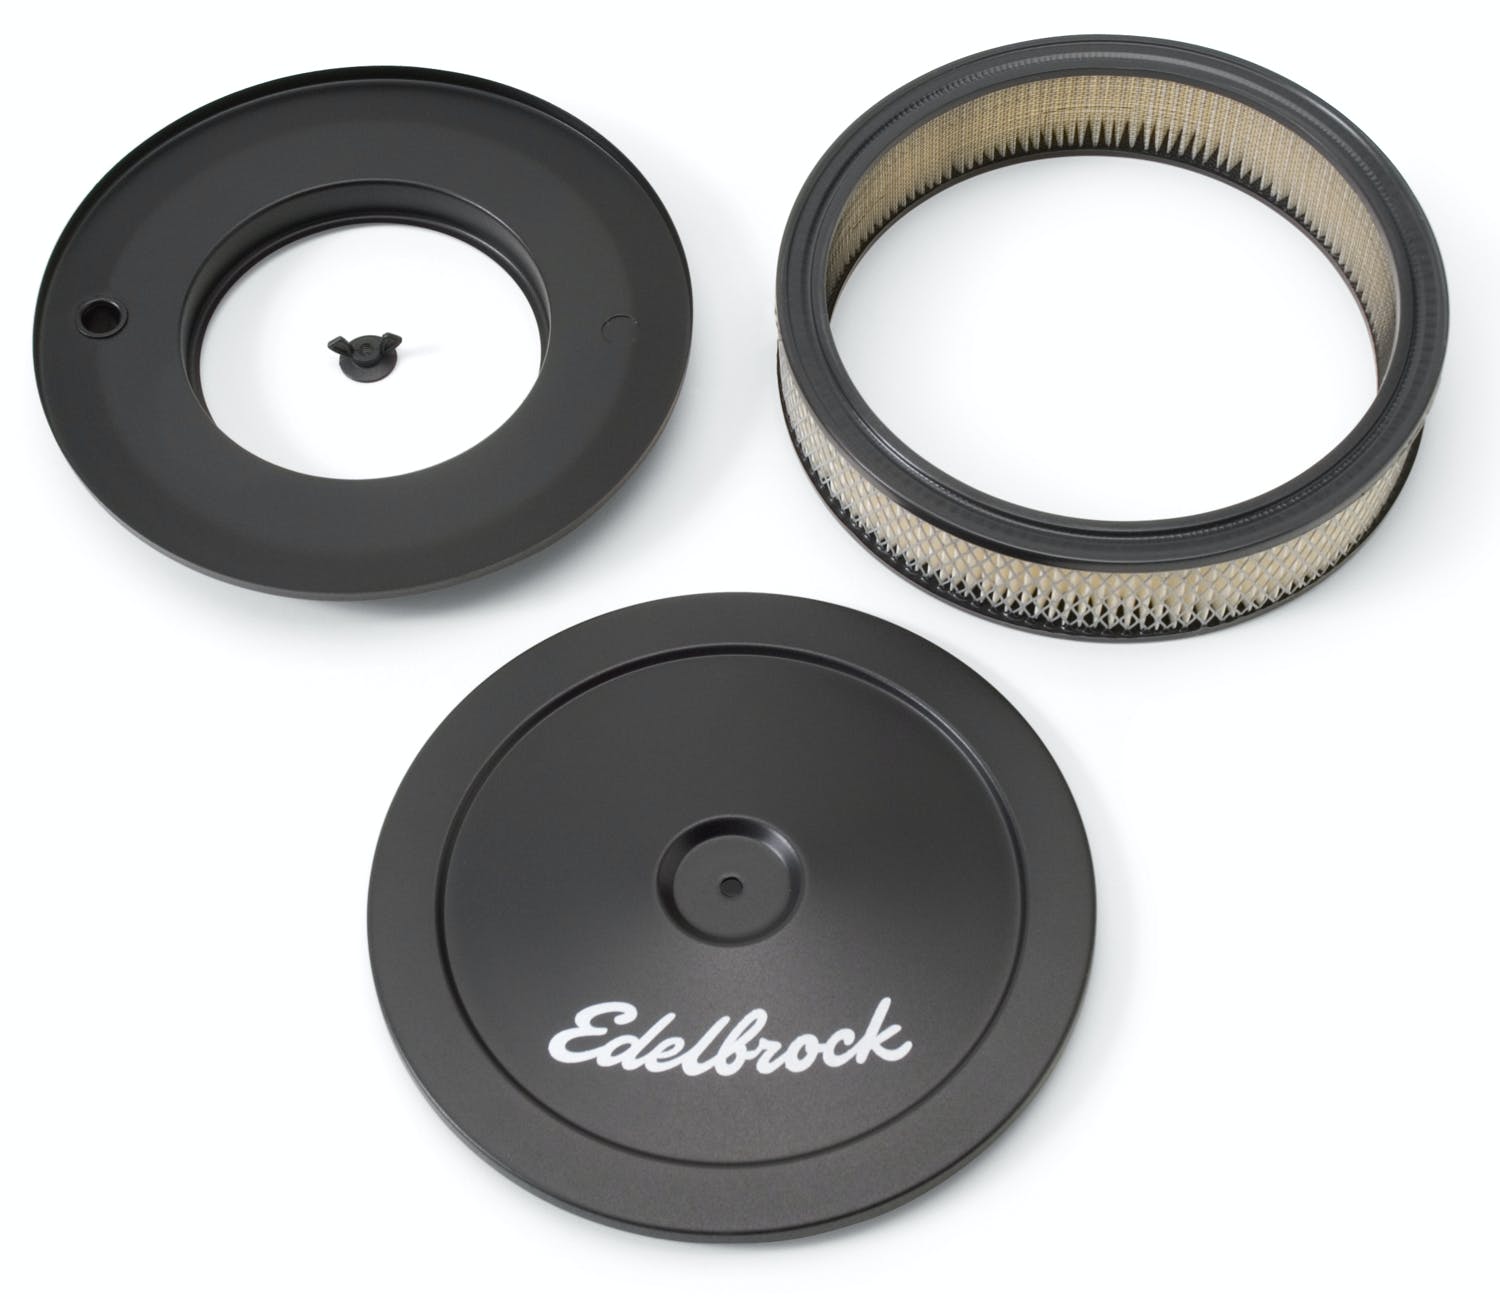 Edelbrock 1203 Pro-Flo Black 10 Round Air Cleaner with 2 Paper Element